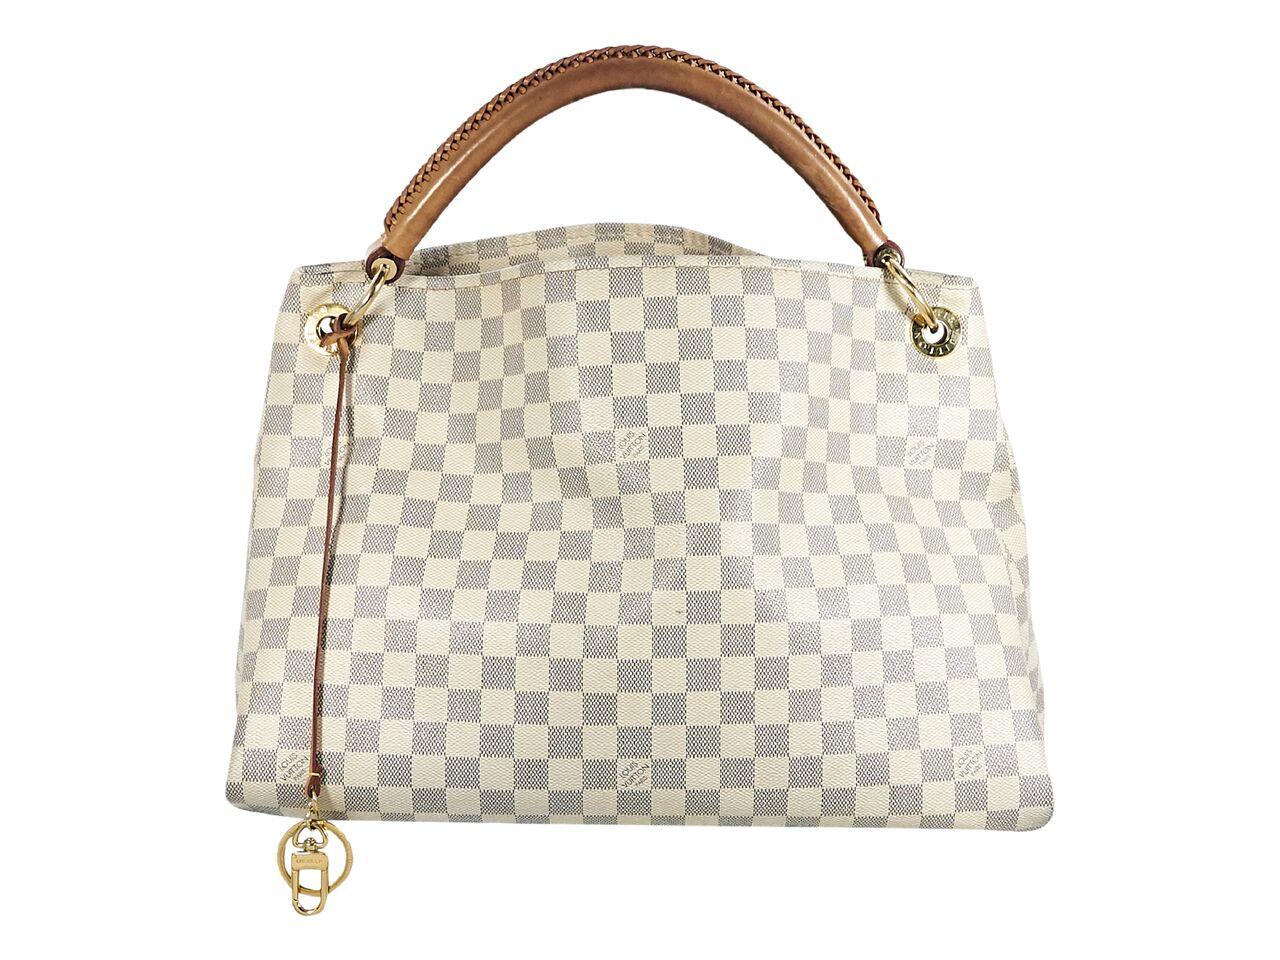 Product details:  White and grey damier azur Artsy MM hobo bag by Louis Vuitton.  Single leather shoulder strap.  Open top.  Lined interior with inner zip and slide pockets.  Protective metal feet.  Goldtone hardware.  16